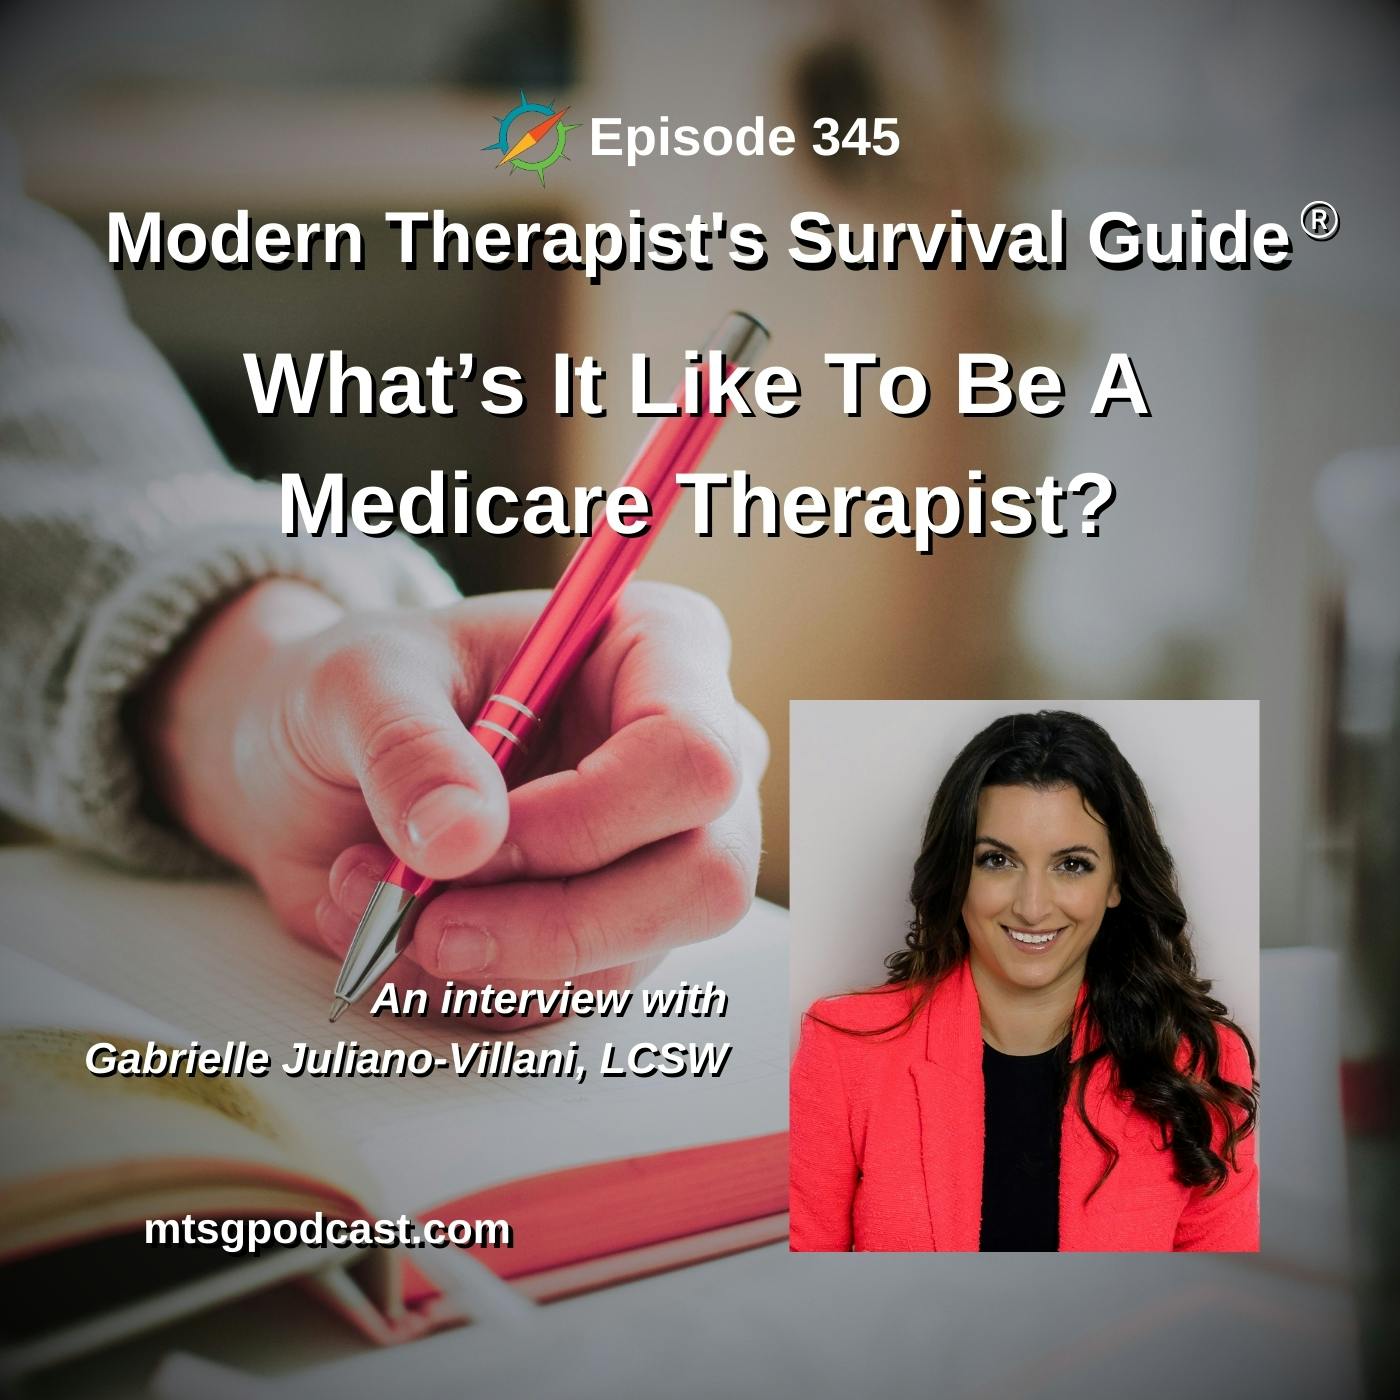 What Is It Like To Be a Medicare Therapist? An interview with Gabrielle Juliano-Villani, LCSW